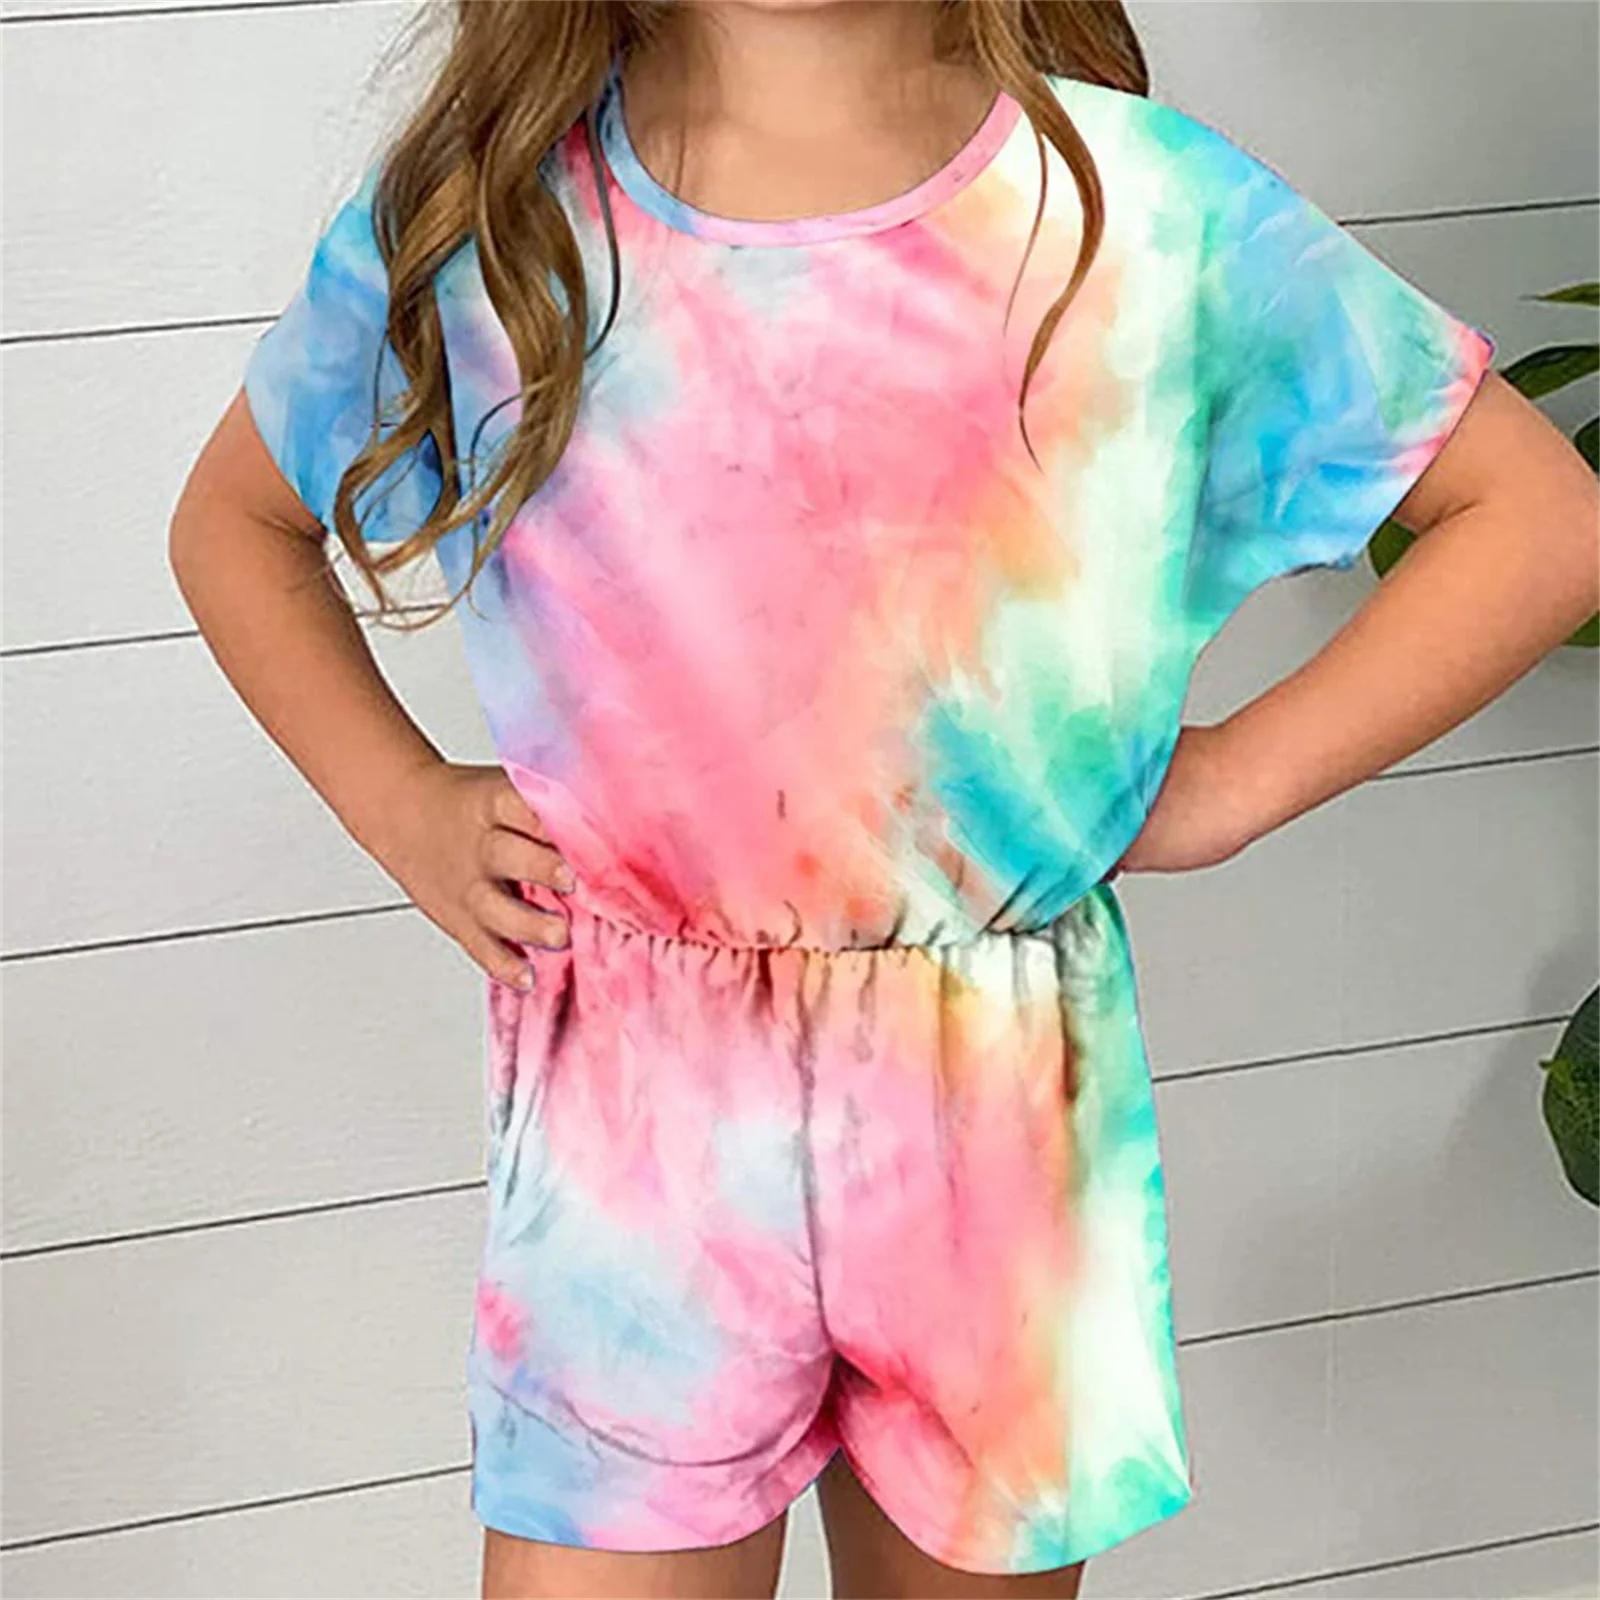 Ecokauer Girls Kids Summer Short Sleeve Rompers One Piece Jumpsuits with Tie Dye Print Fashion Outfits 